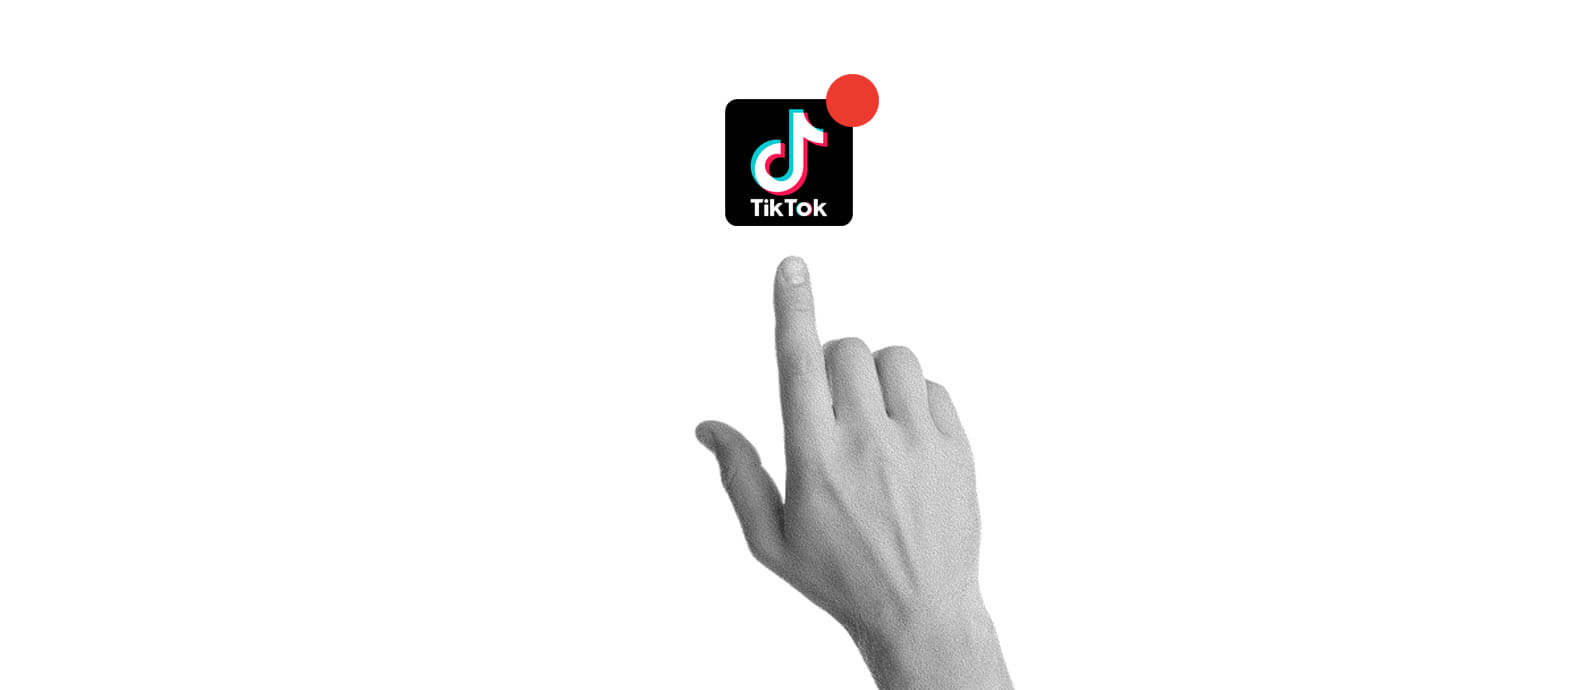 dismissed from robbery meaning｜TikTok Search